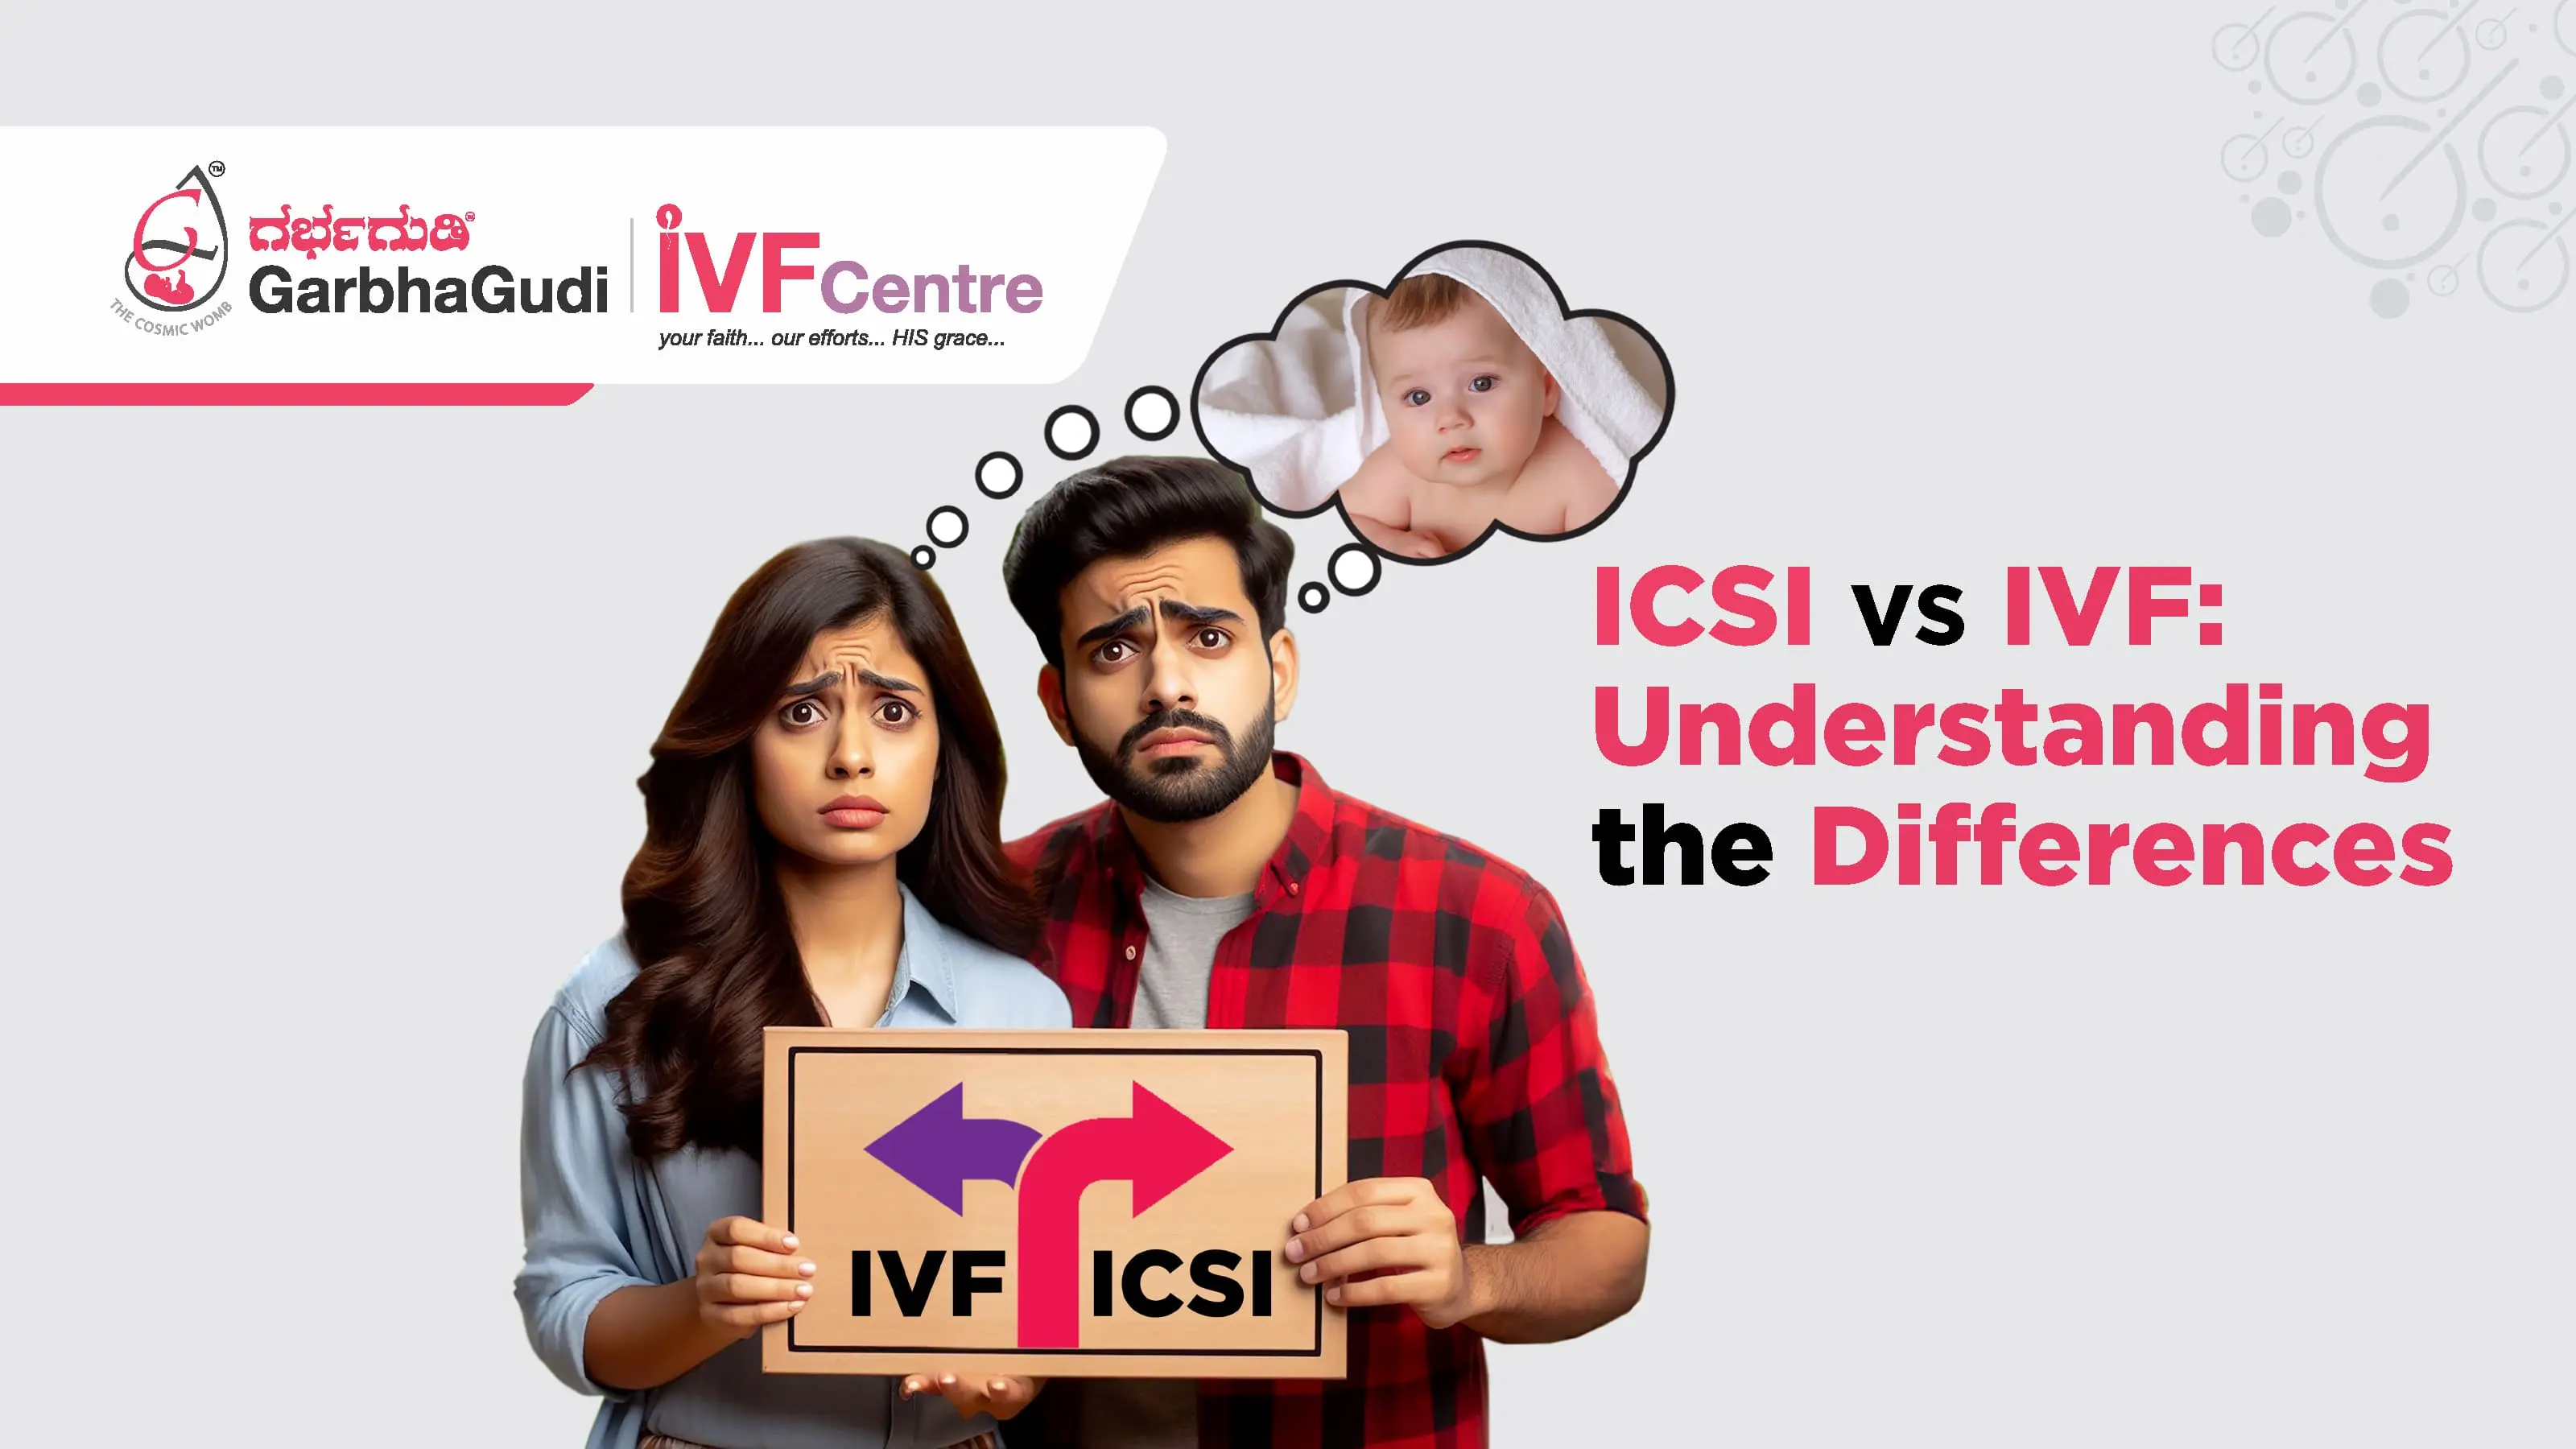 ICSI vs IVF: Understanding the Differences